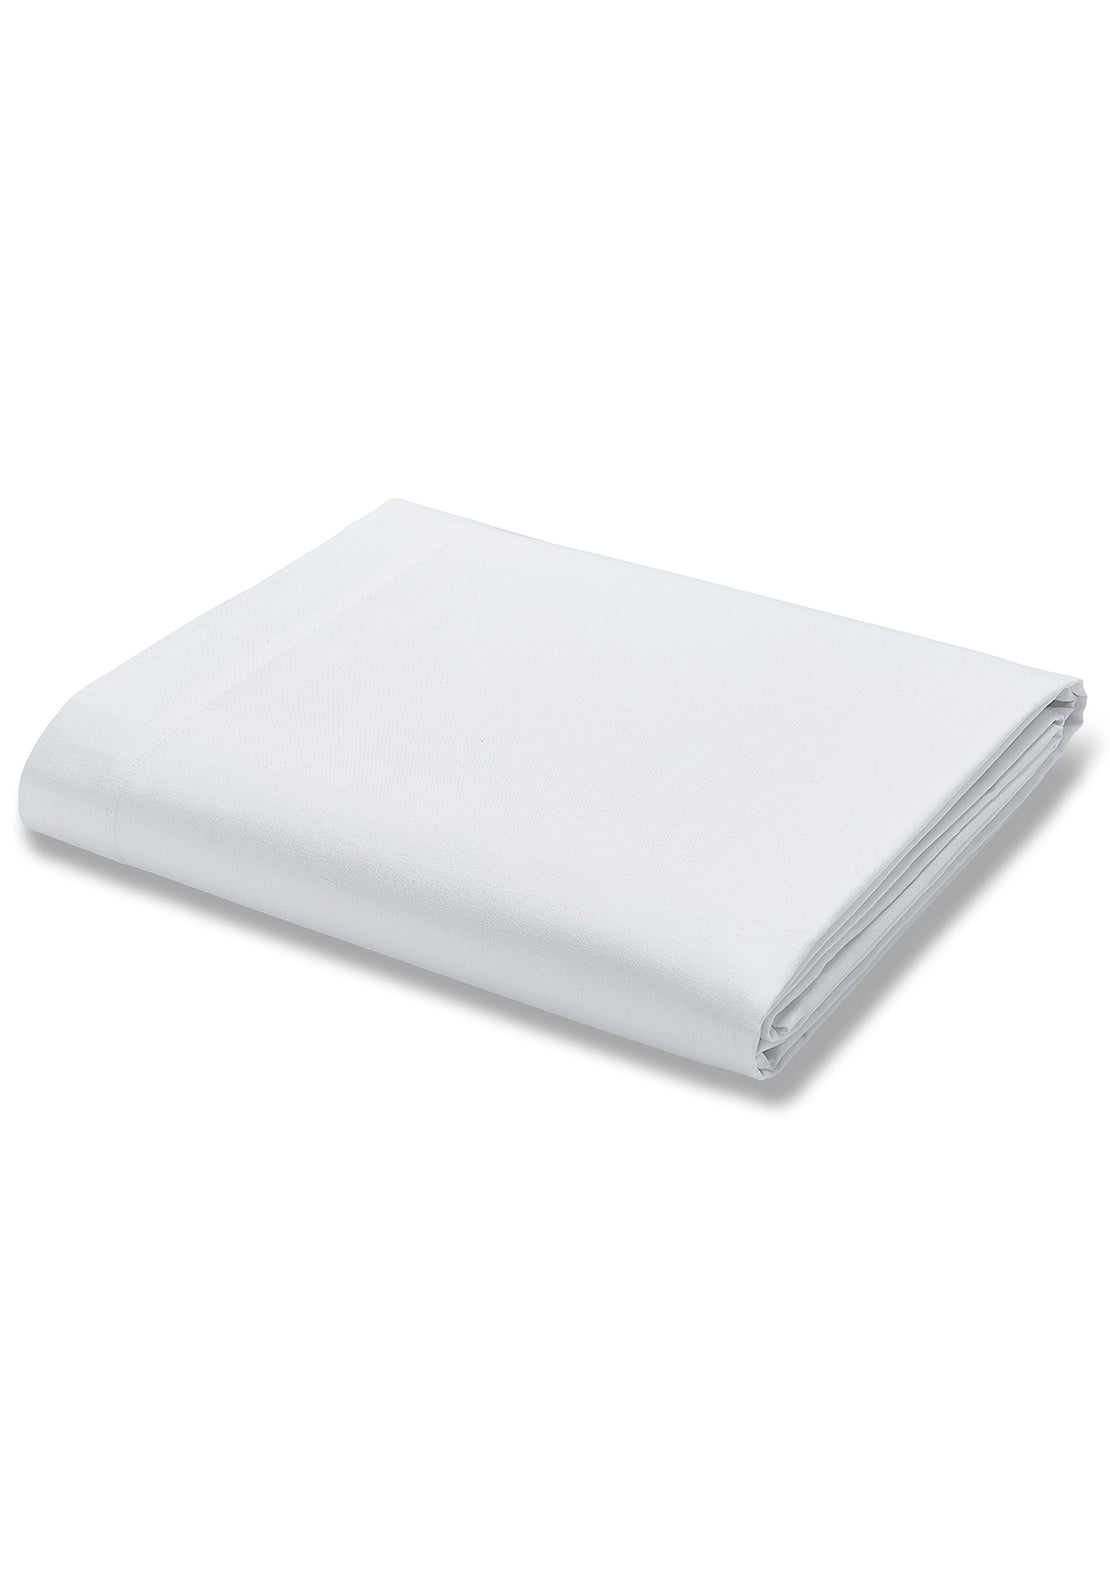 The Home Collection 300 Thread Count Flat Sheet - White 1 Shaws Department Stores